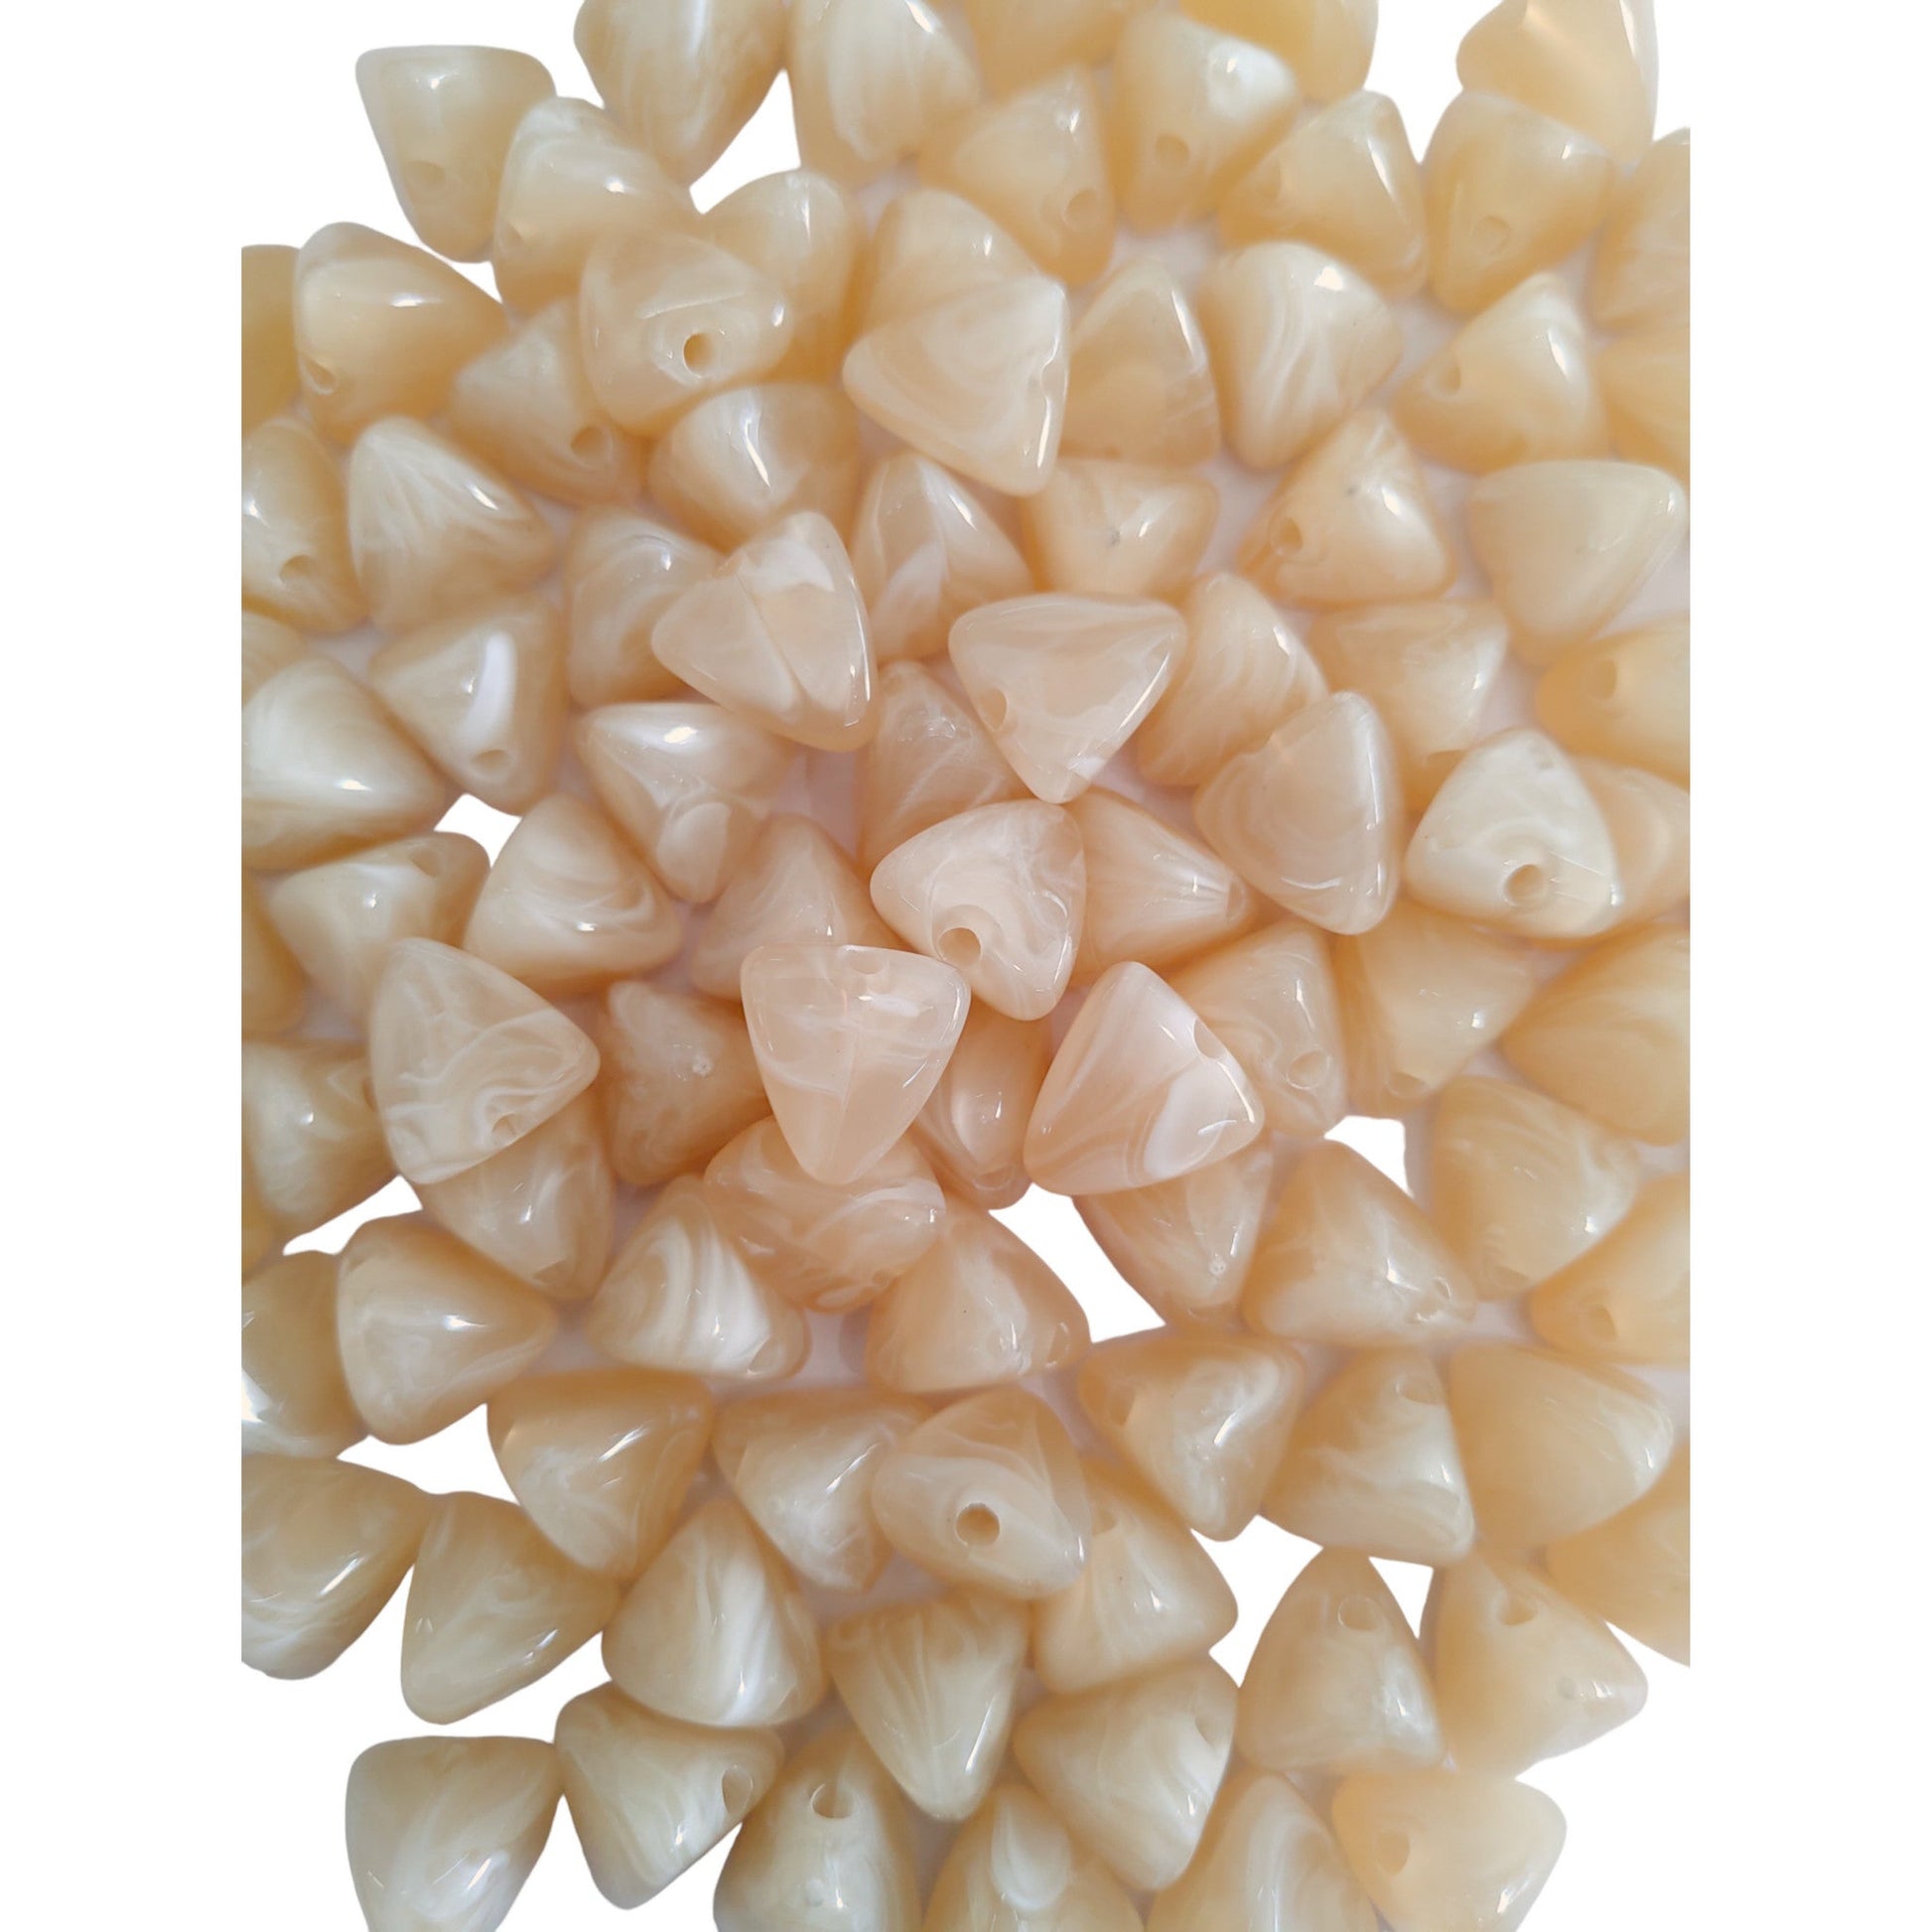 Indian Petals Indian Perals Pyramid Shaped Color Marble Beads Ideal for Jewelry designing and Craft Making or Decor